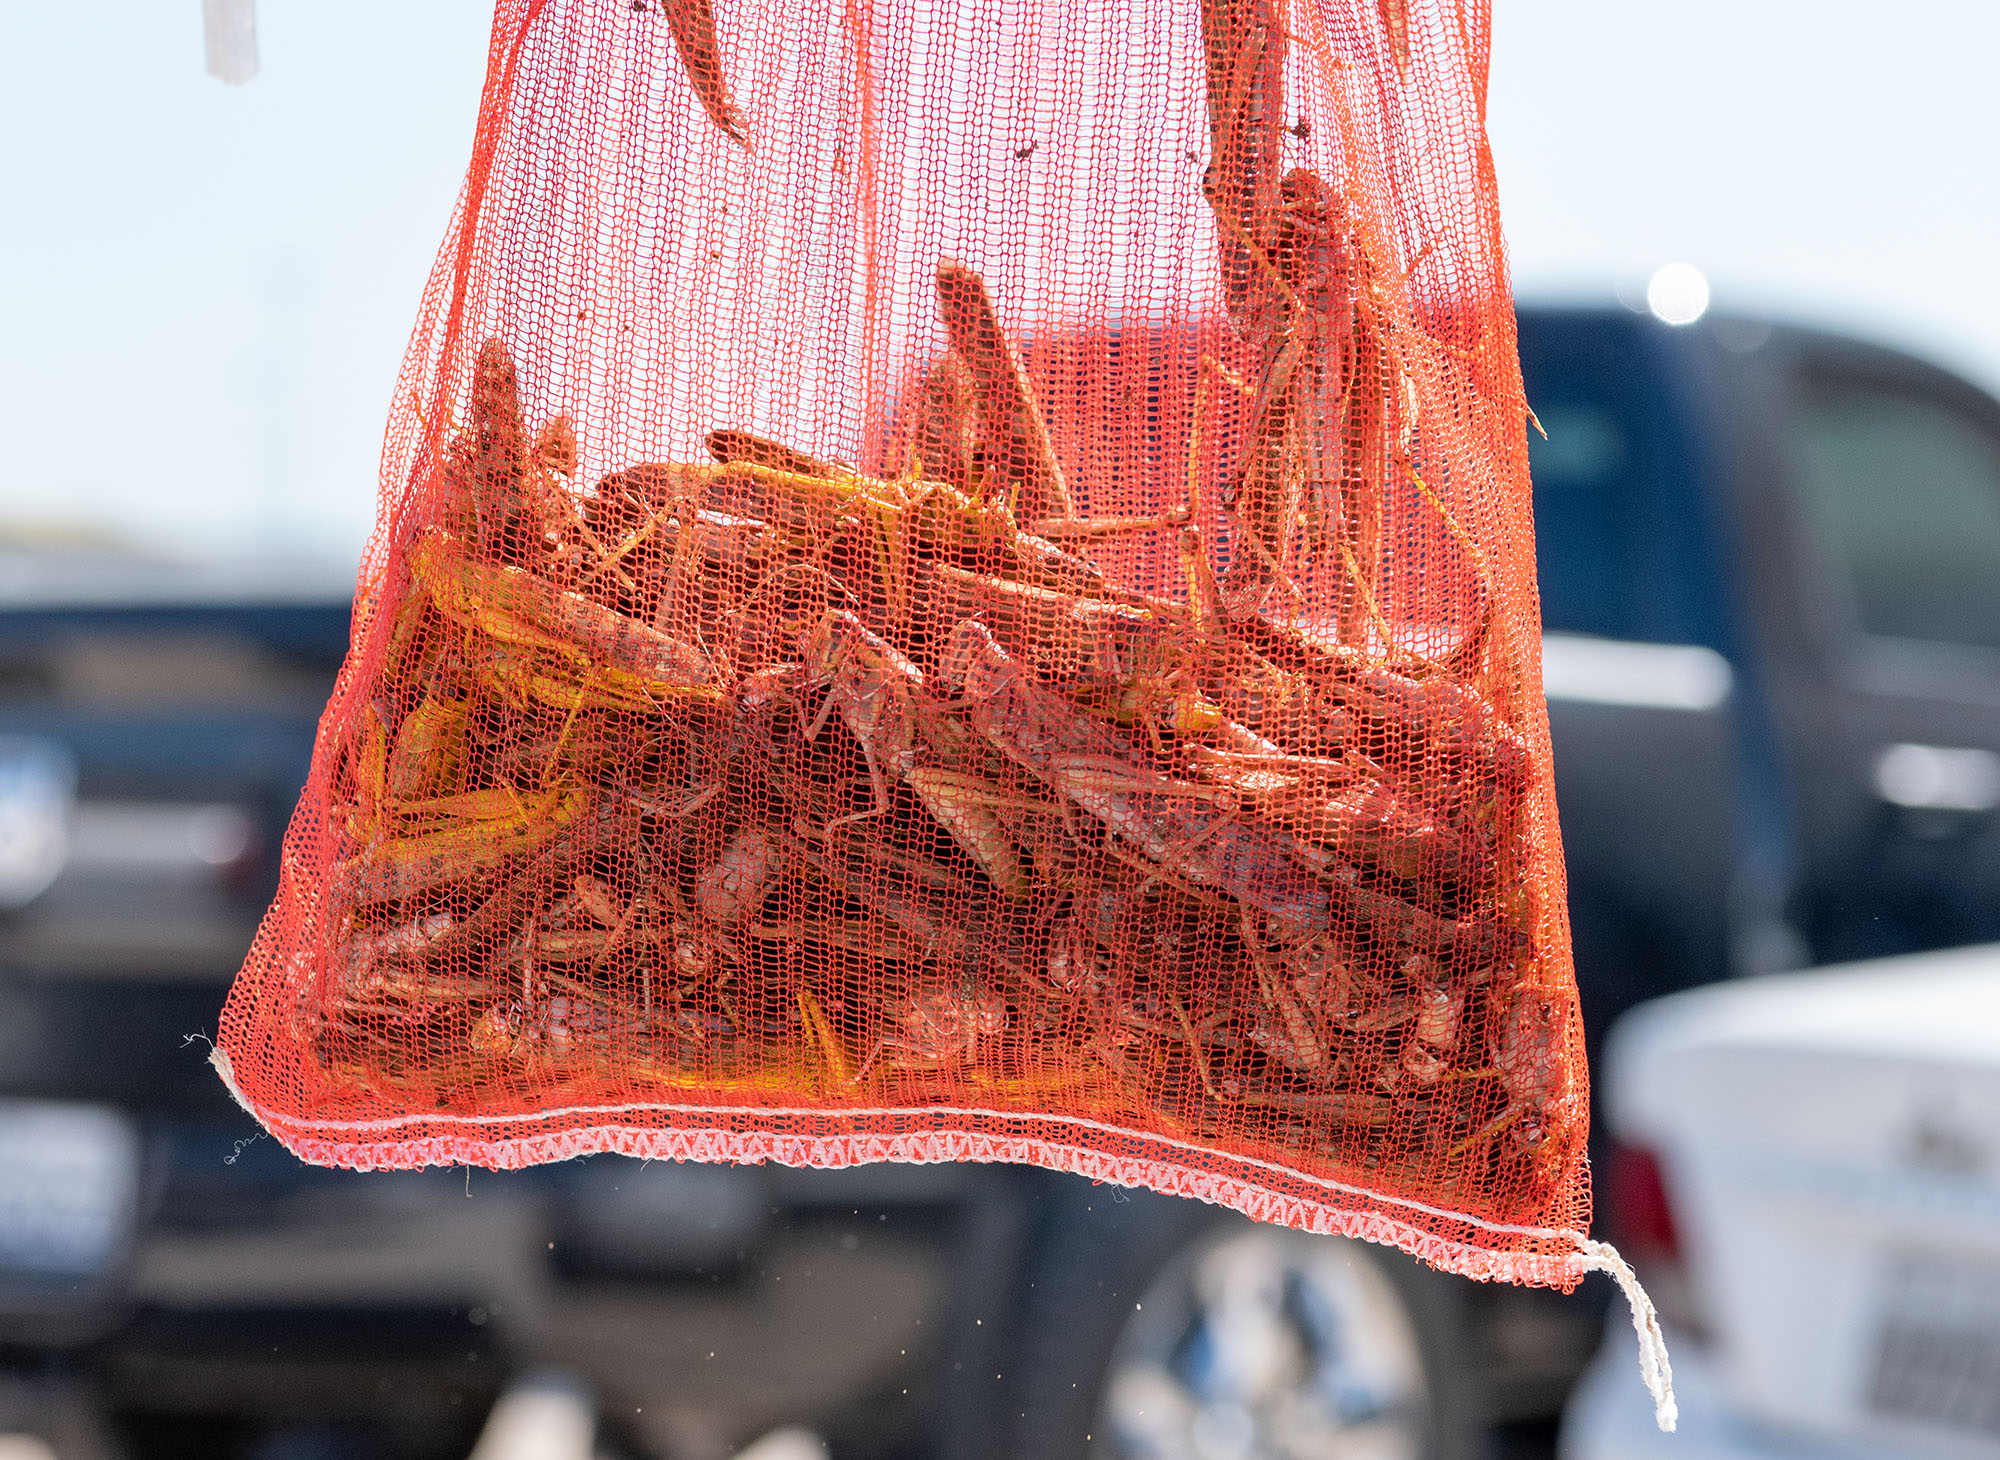 Selling grasshoppers  making a significant comeback